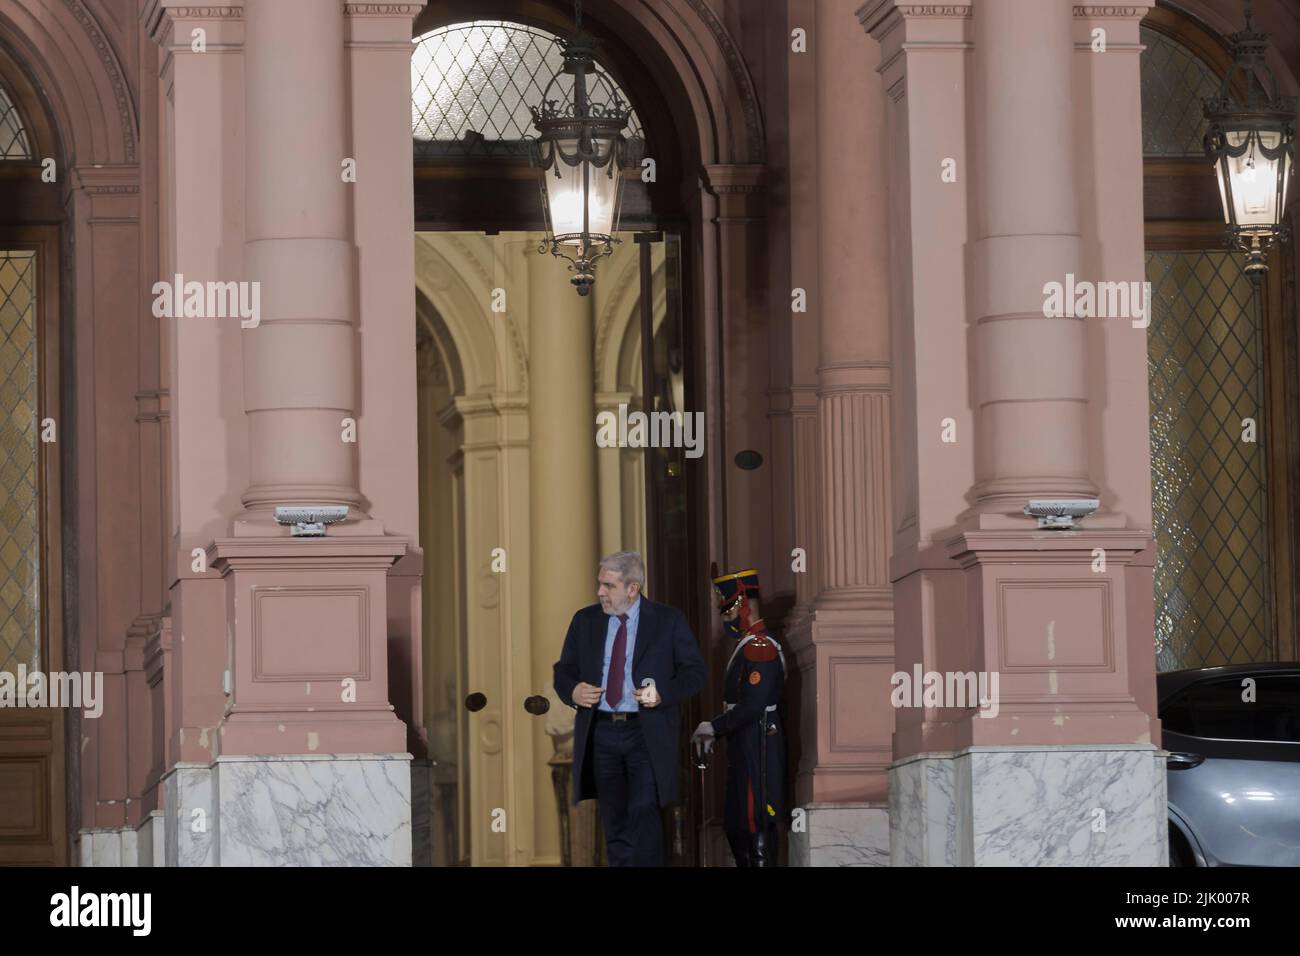 Buenos Aires, Argentina. 28th July, 2022. After several changes in the cabinet of ministers, Anibal Fernández, Minister of Security of the Nation, met with the President at the Government House. The defense minister leaves the government house. (Photo by Esteban Osorio/Pacific Press) Credit: Pacific Press Media Production Corp./Alamy Live News Stock Photo